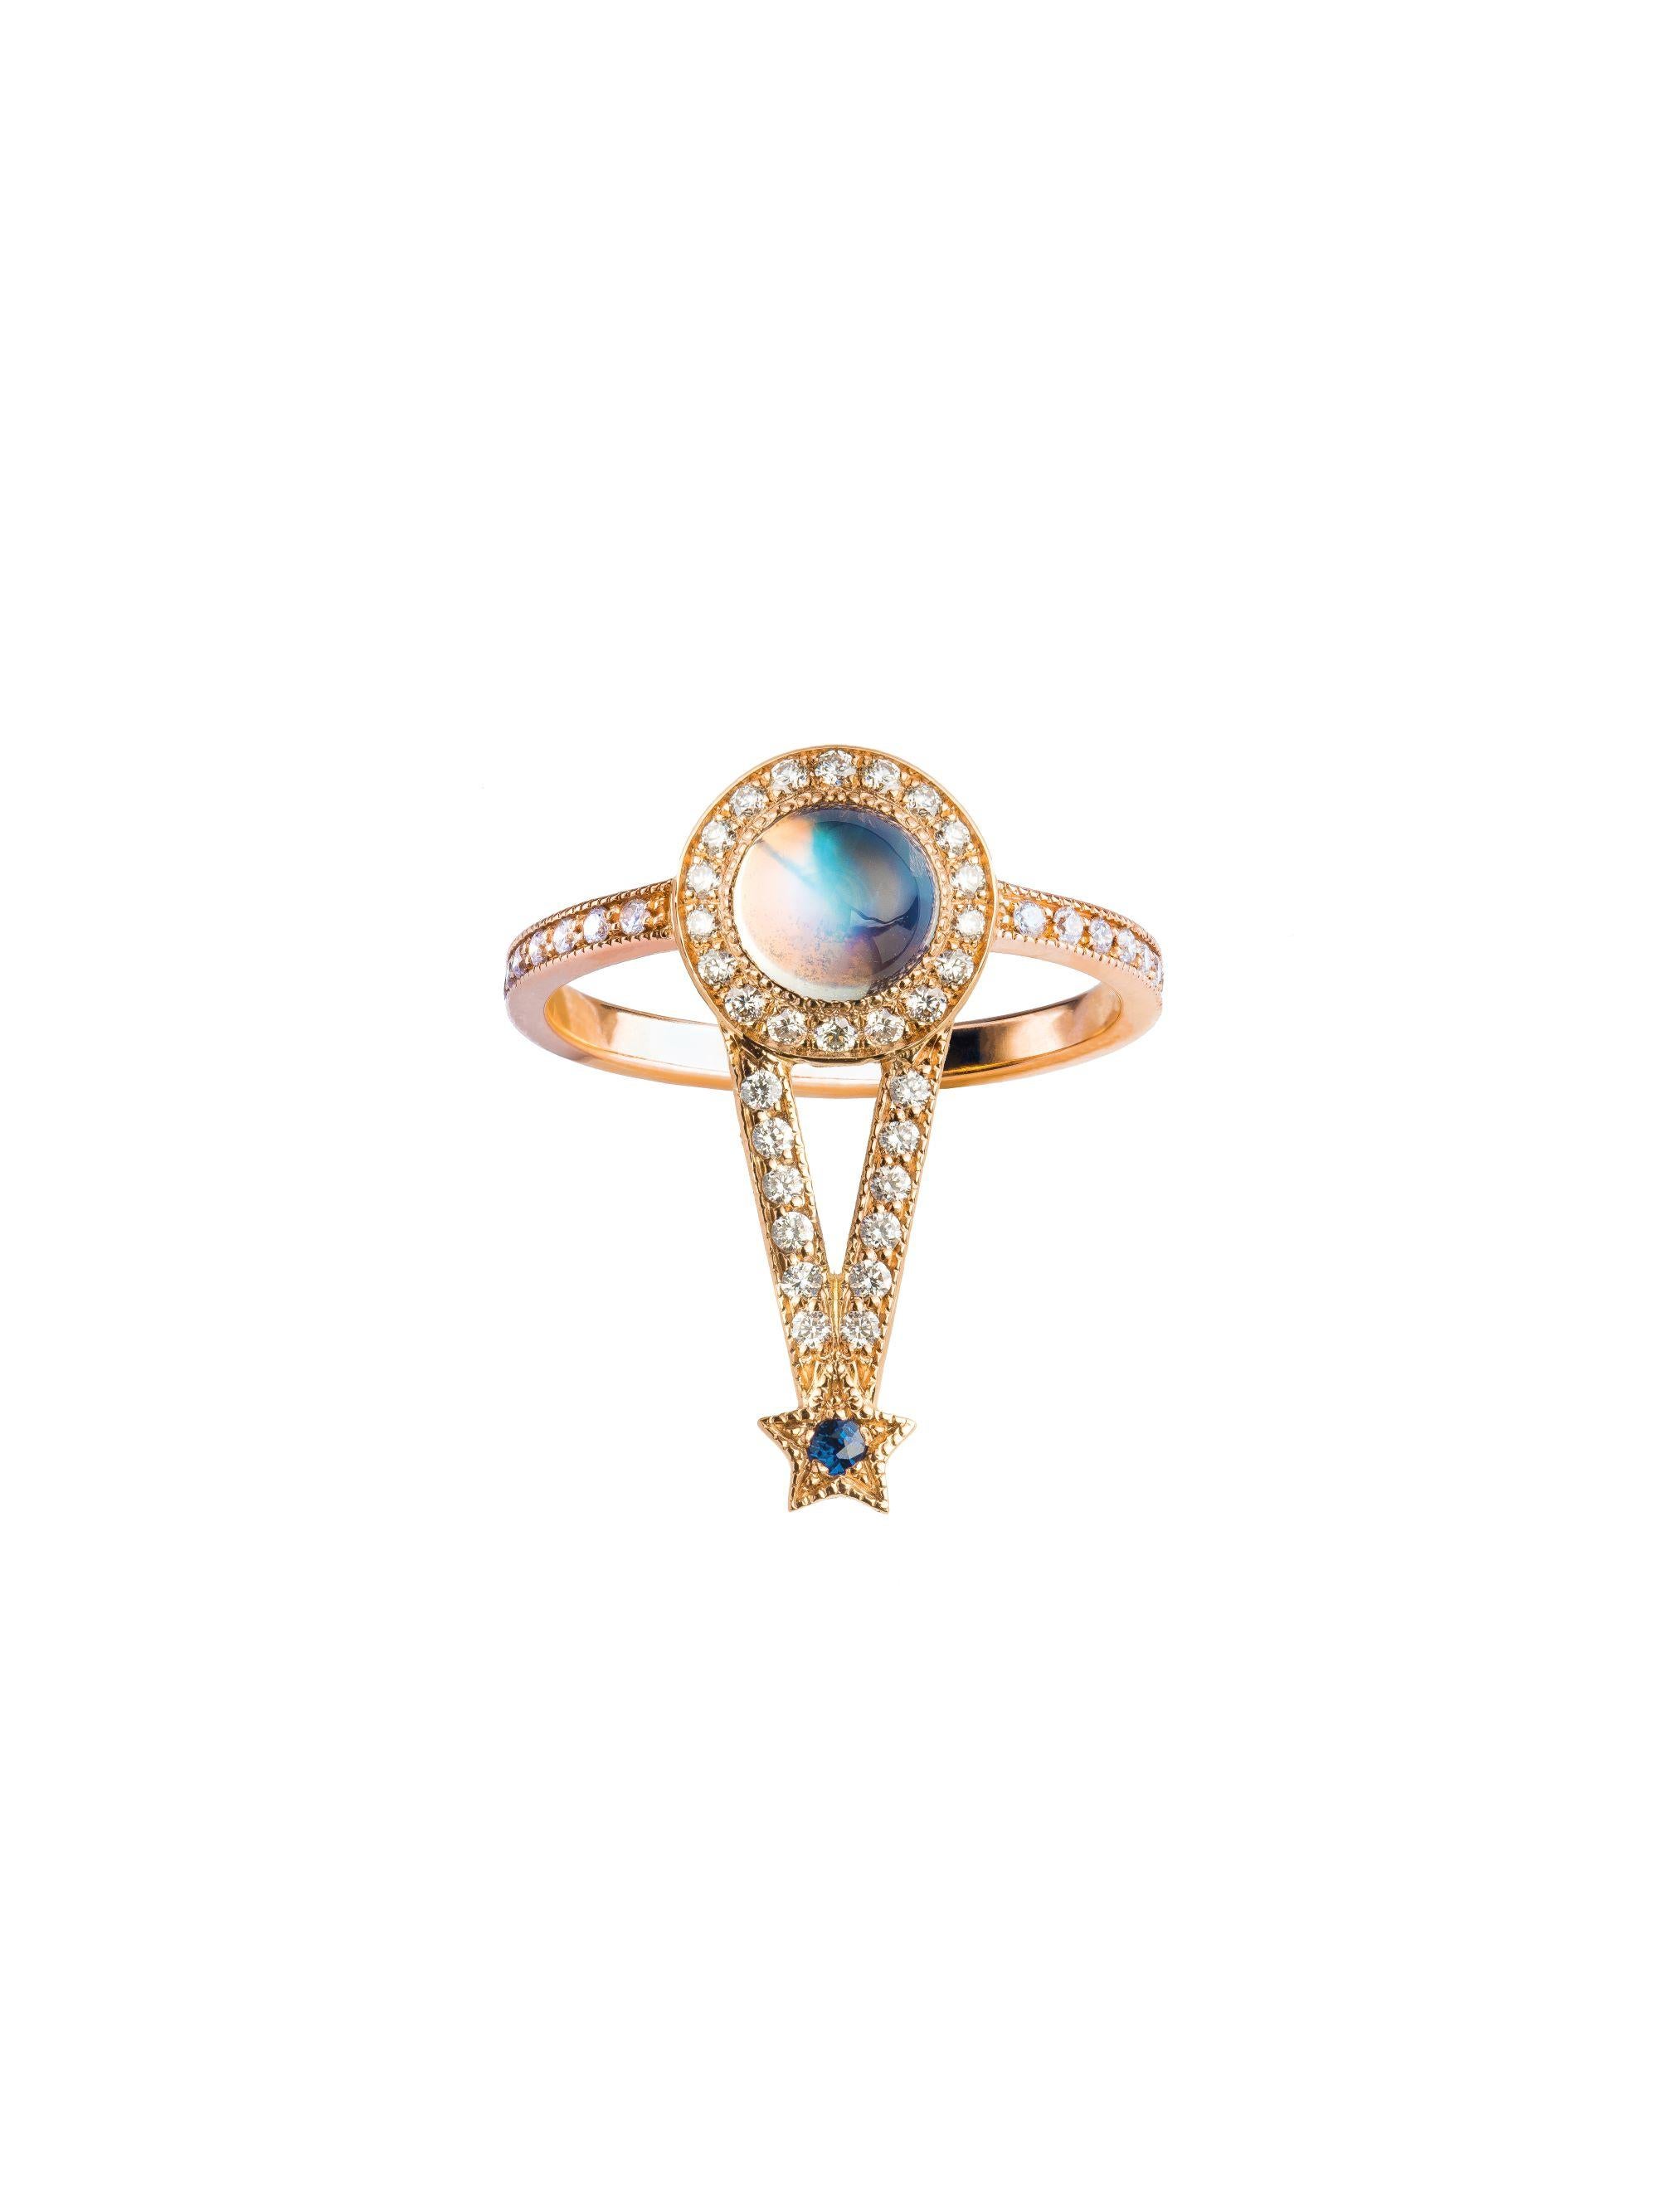 Maia Ring

18kt rose gold, 0.97 ct Rainbow Moonstone round cabochon, 0.30 ct White Diamonds, 0.02 ct Blue Sapphire, 3.75 gr total gold. 
This magical ring has a wow effect and can be worn alone or stacked with any of our rings from the Pleiadee